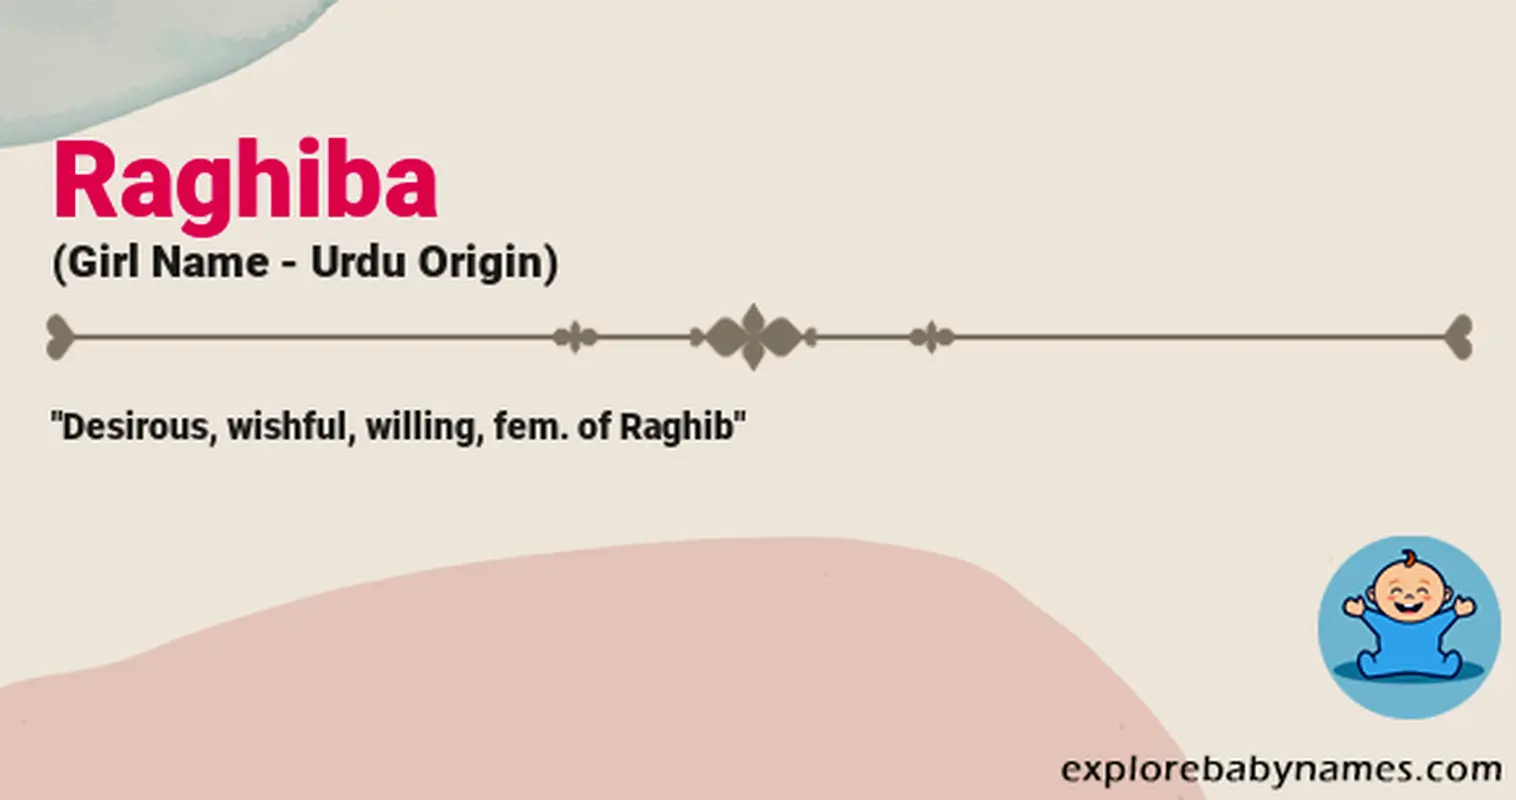 Meaning of Raghiba